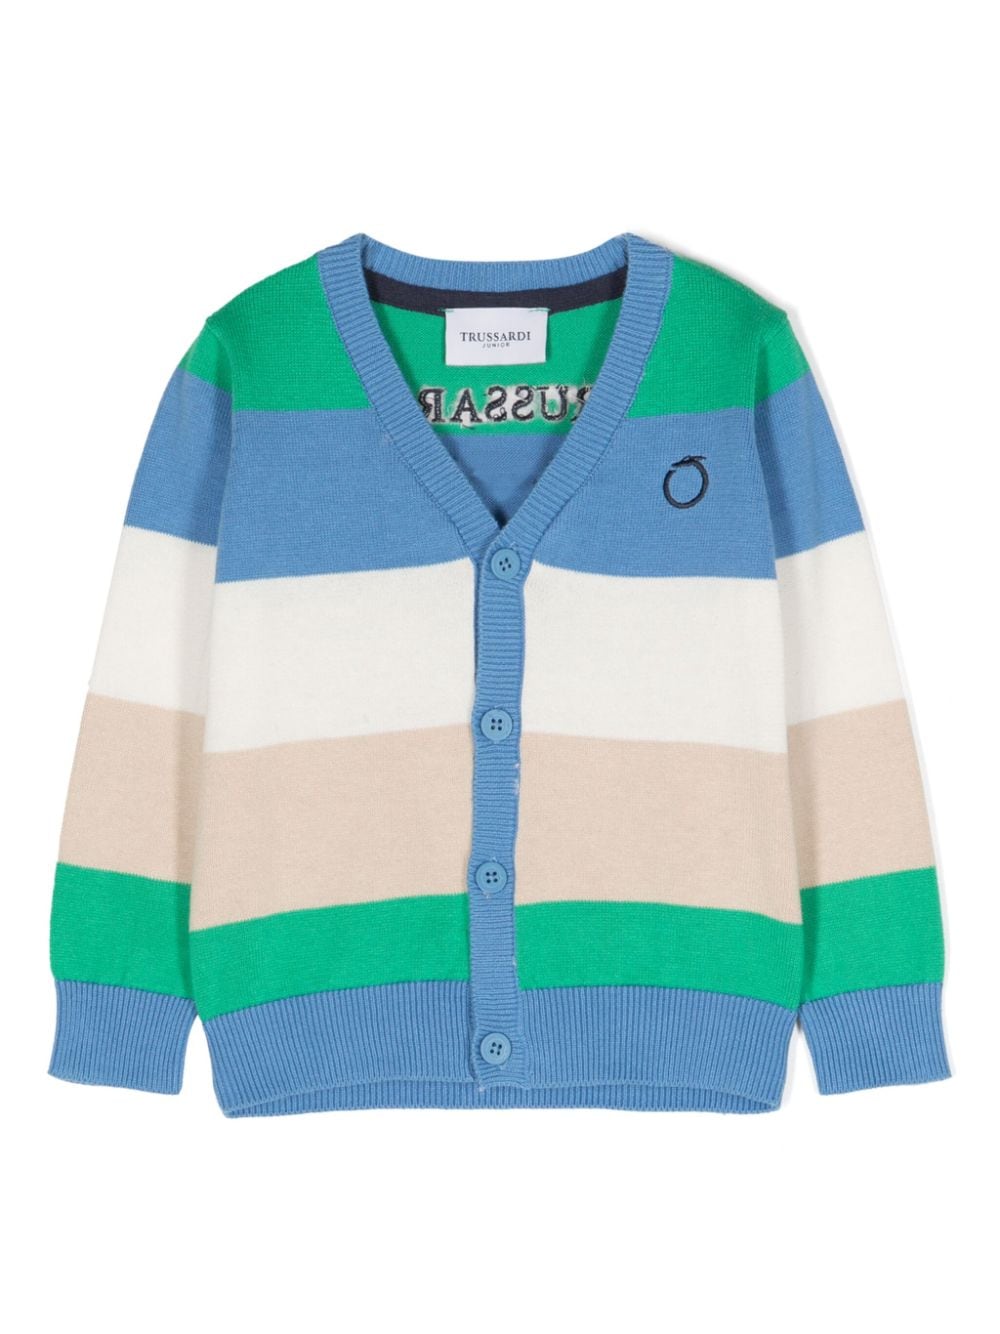 Blue, green and white cardigan for newborns with logo